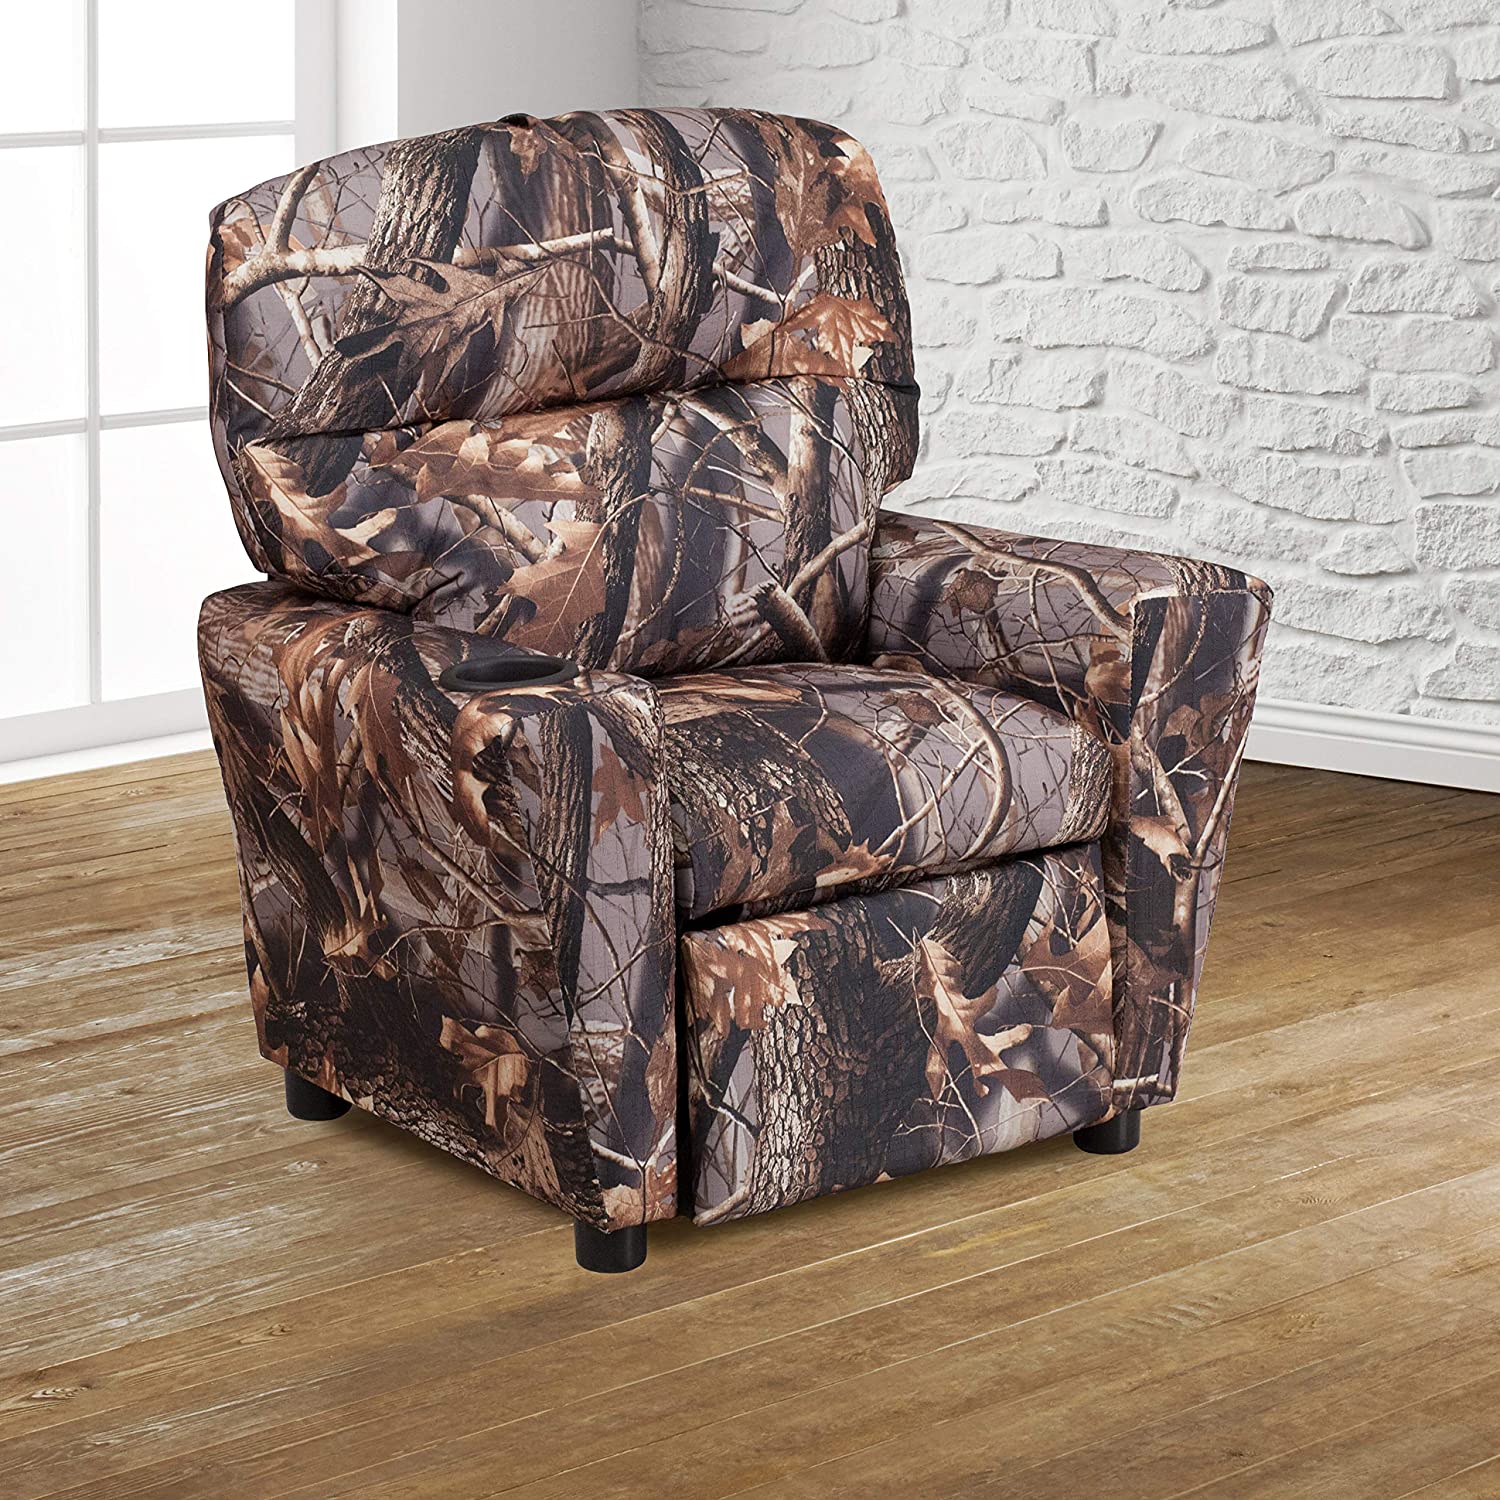 Flash Furniture Contemporary Camouflaged Fabric Kids Recliner with Cup Holder